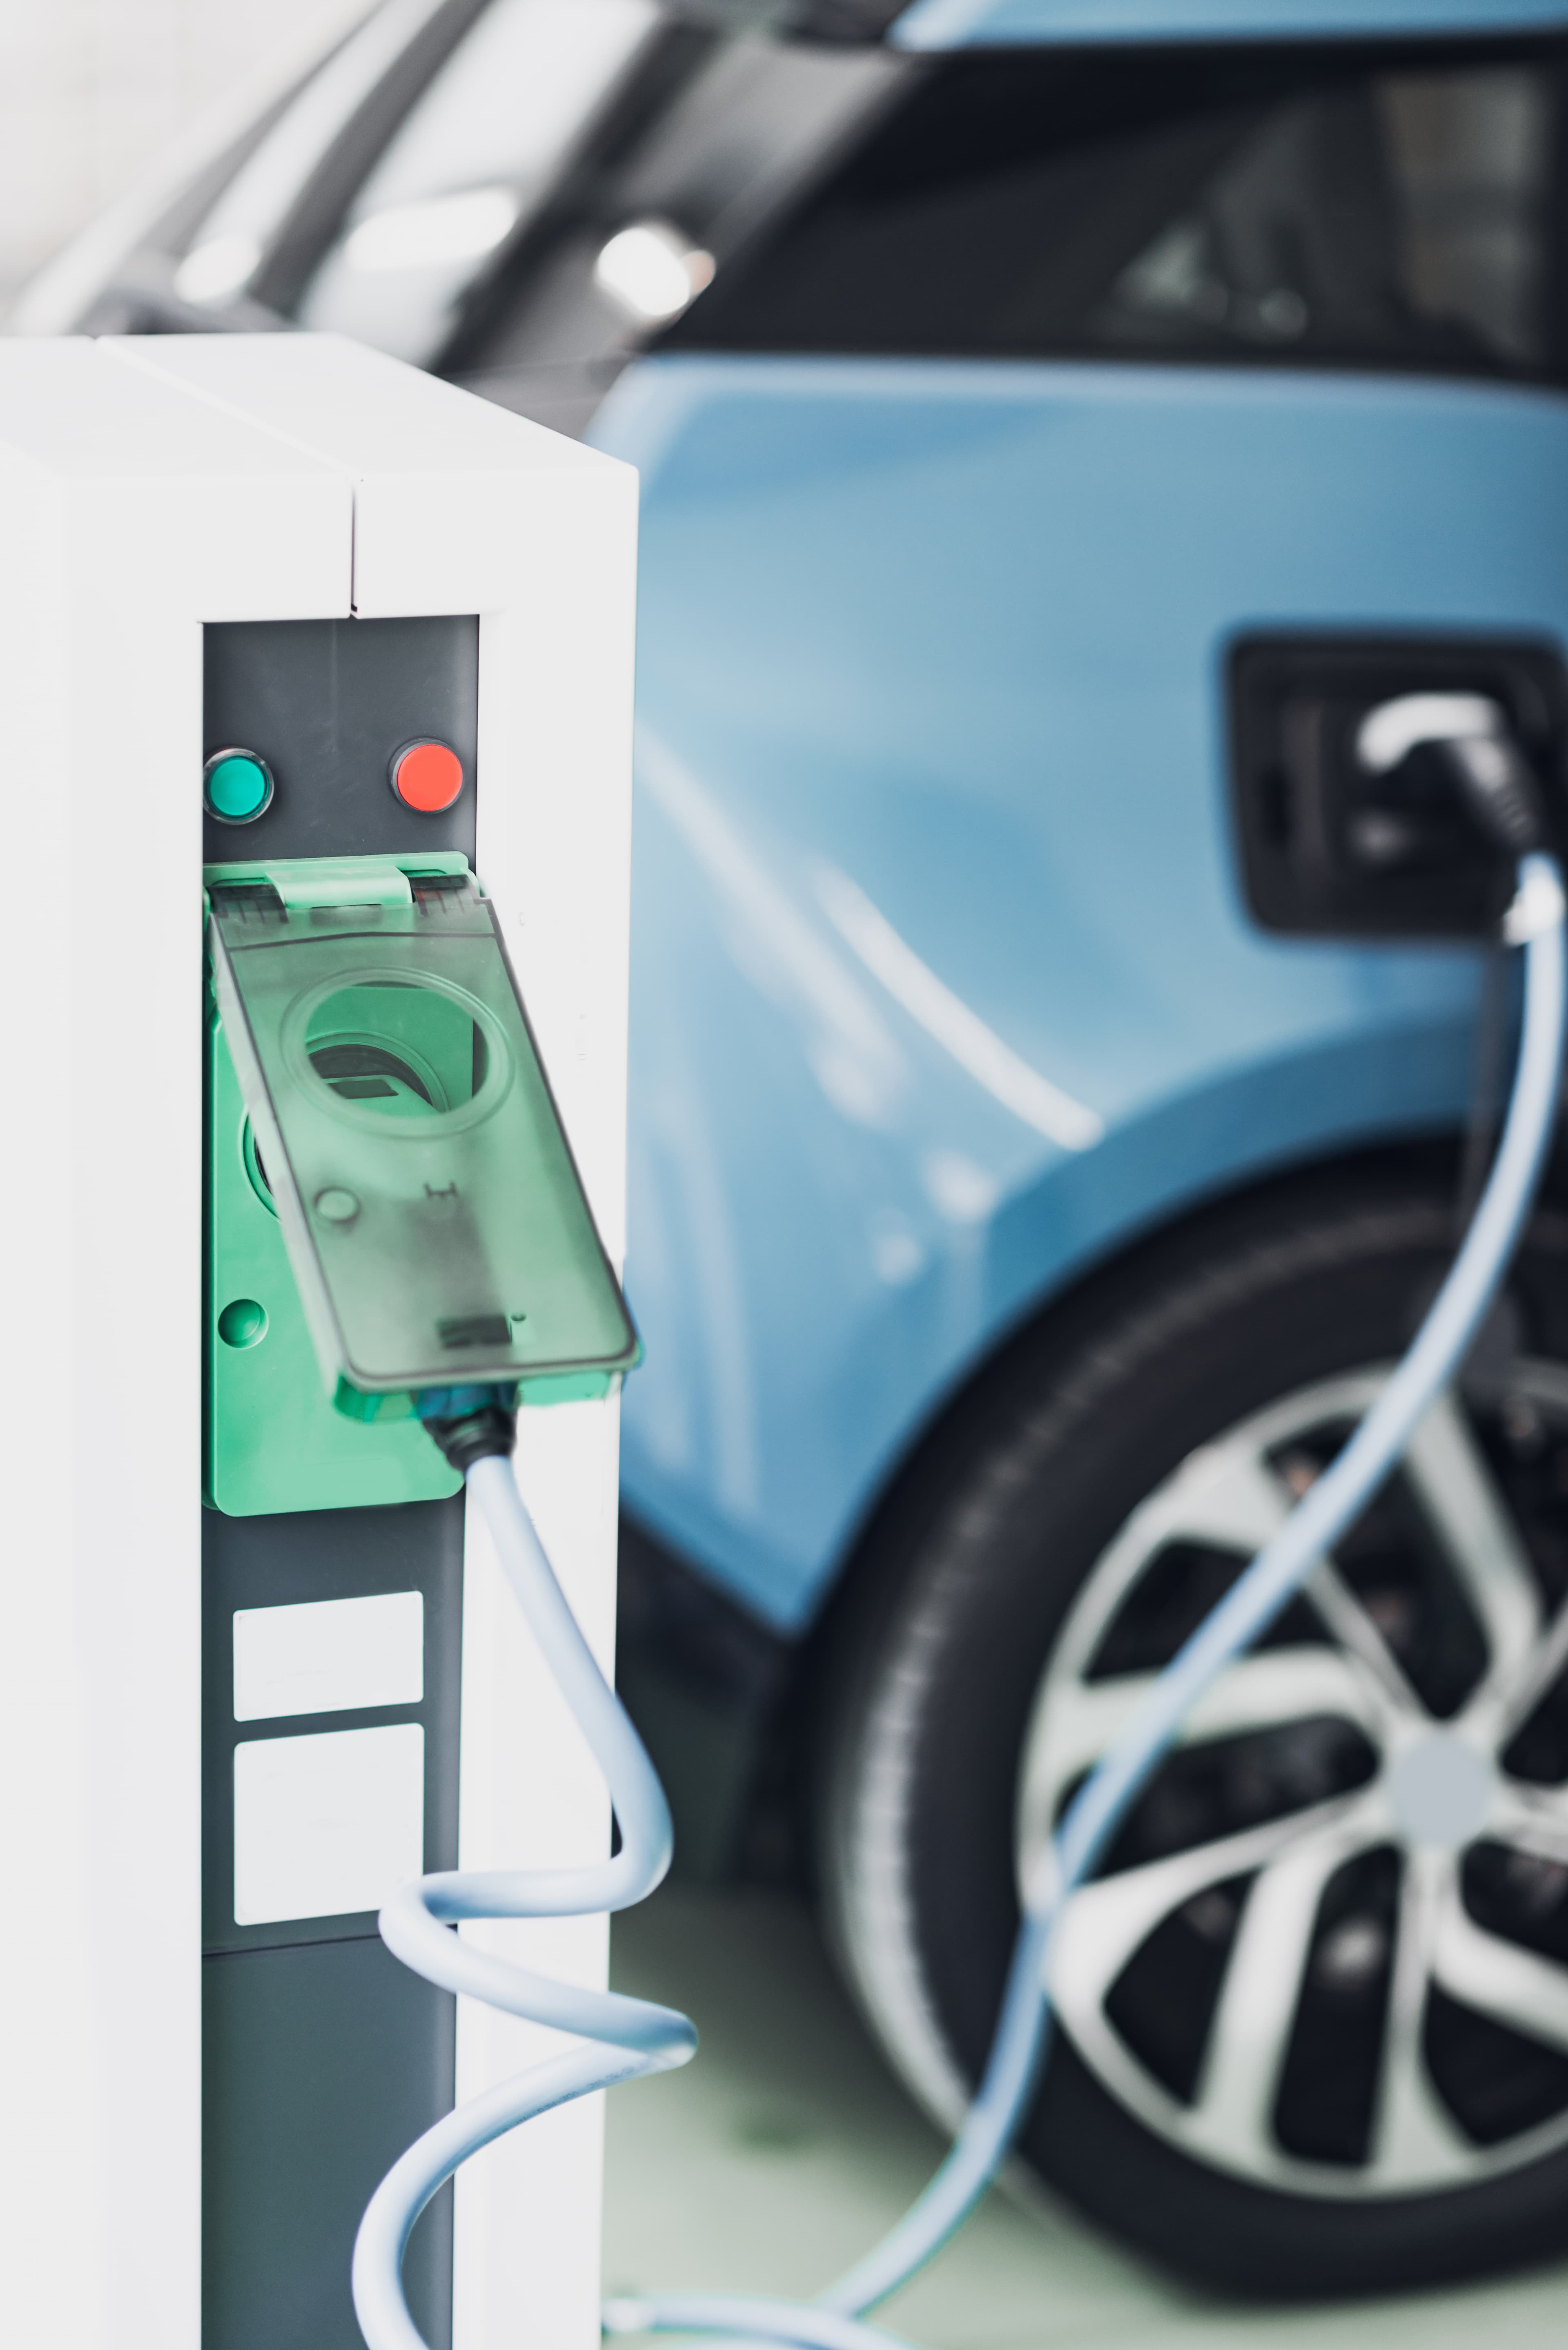 Hero Electric, Bolt to set up 50K EV charging stations across India